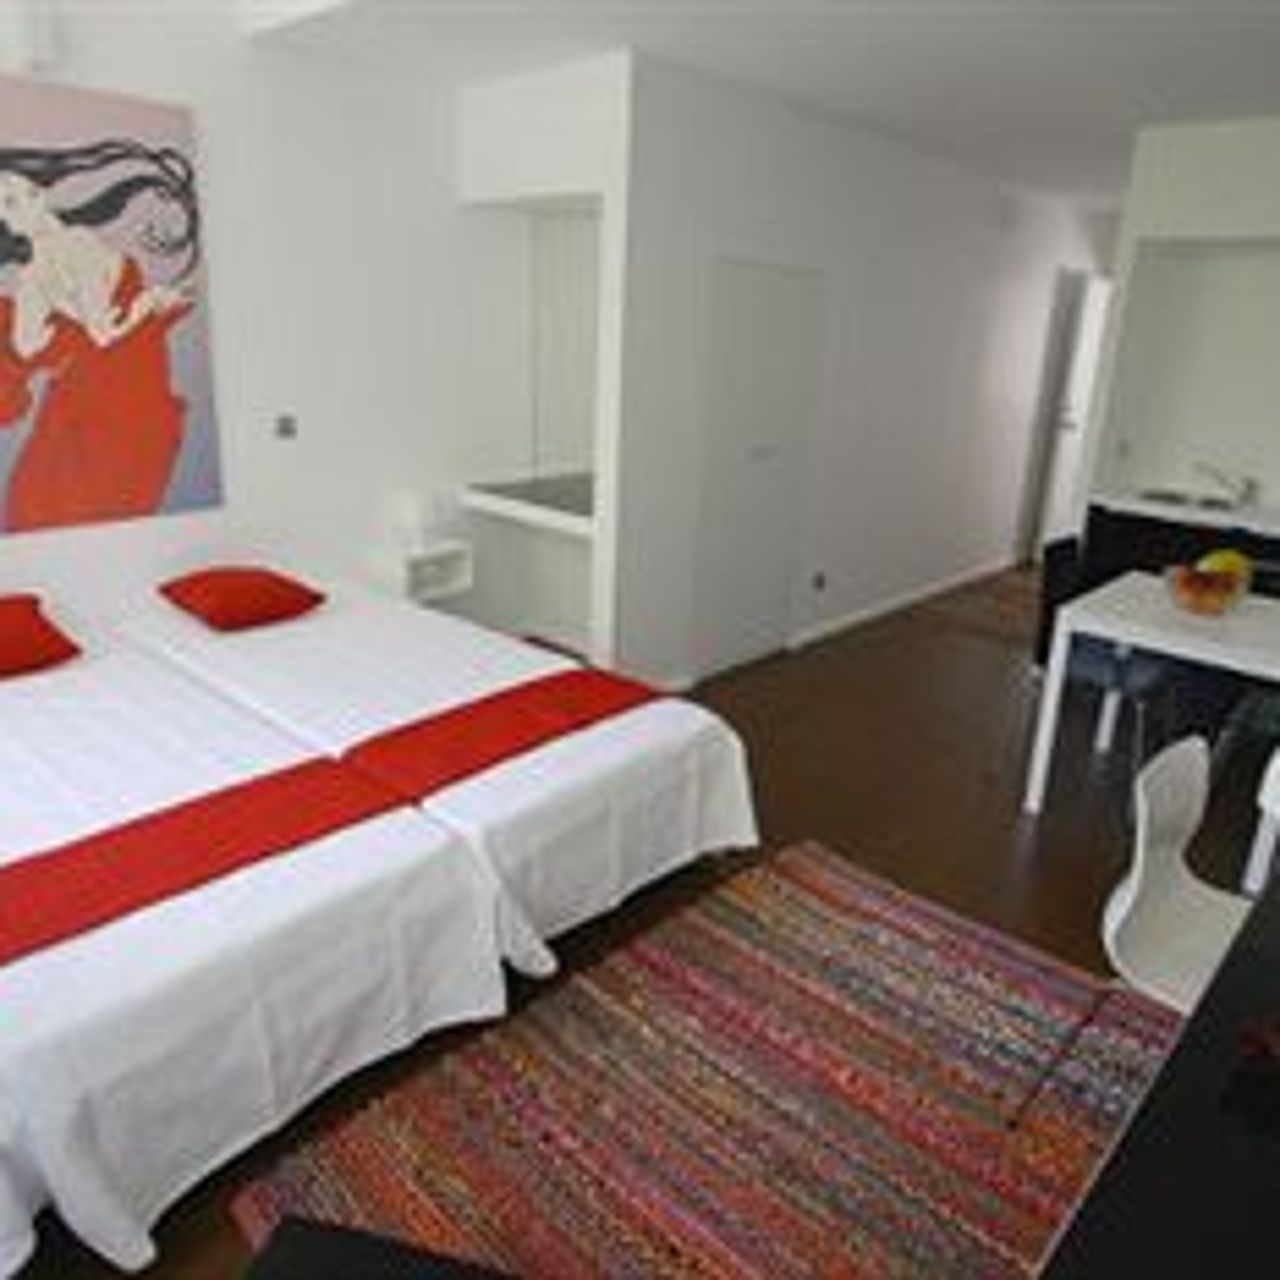 Hotel Fine Arts Guesthouse - Porto - Great prices at HOTEL INFO